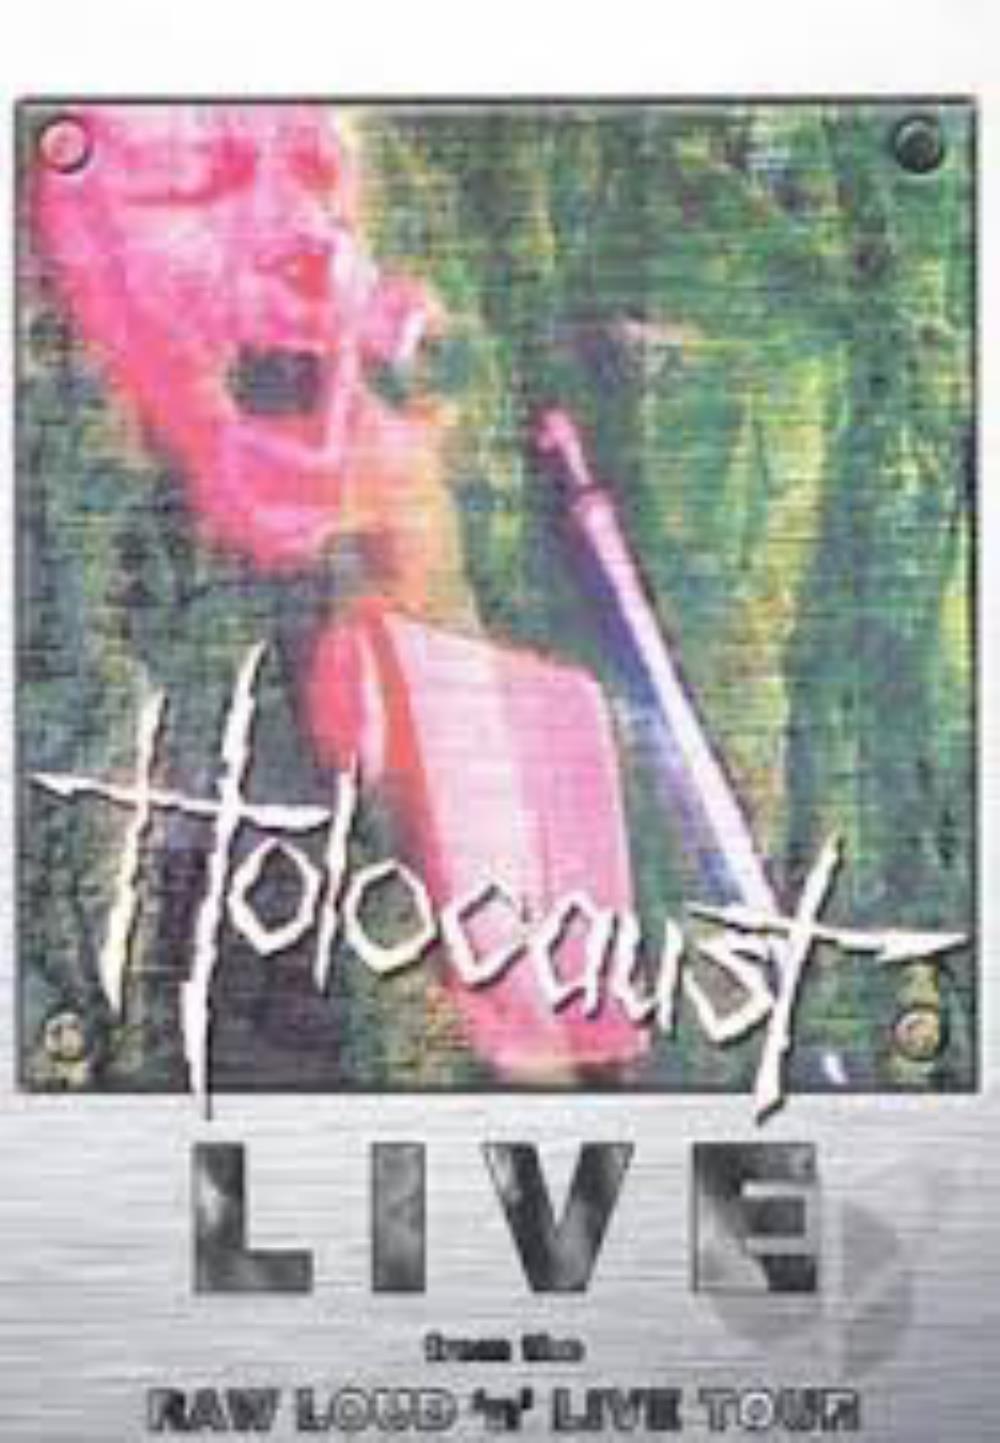 Holocaust Live from the Raw Loud 'n' Live Tour album cover